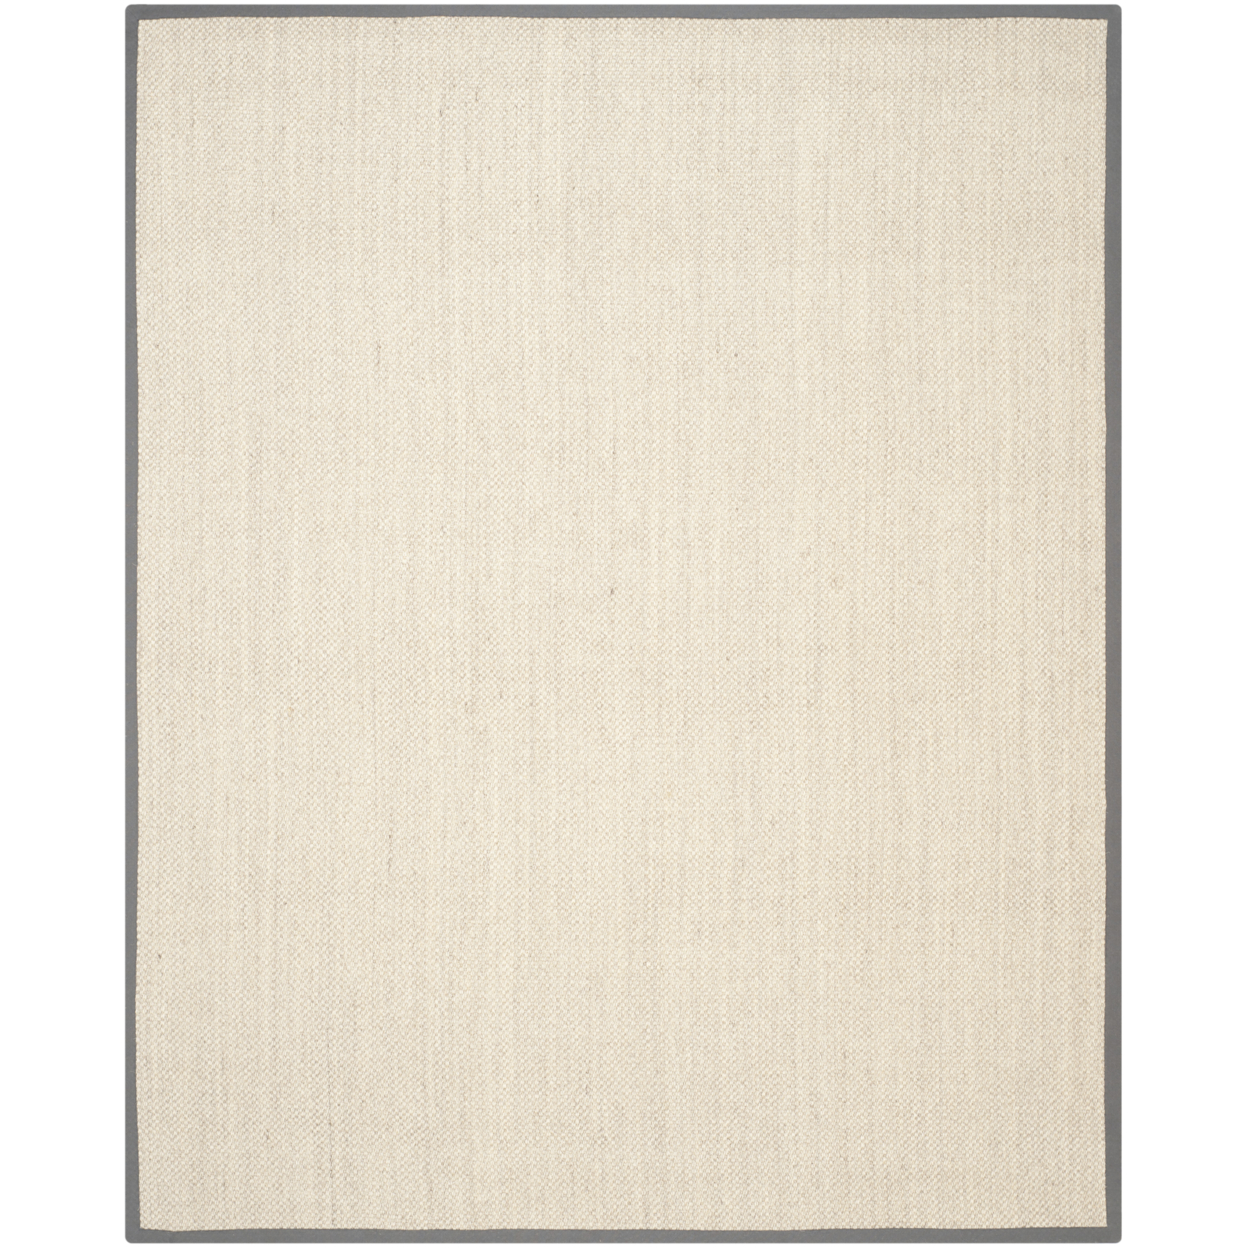 SAFAVIEH Natural Fiber Collection NF443B Marble/Grey Rug - 8' X 10'